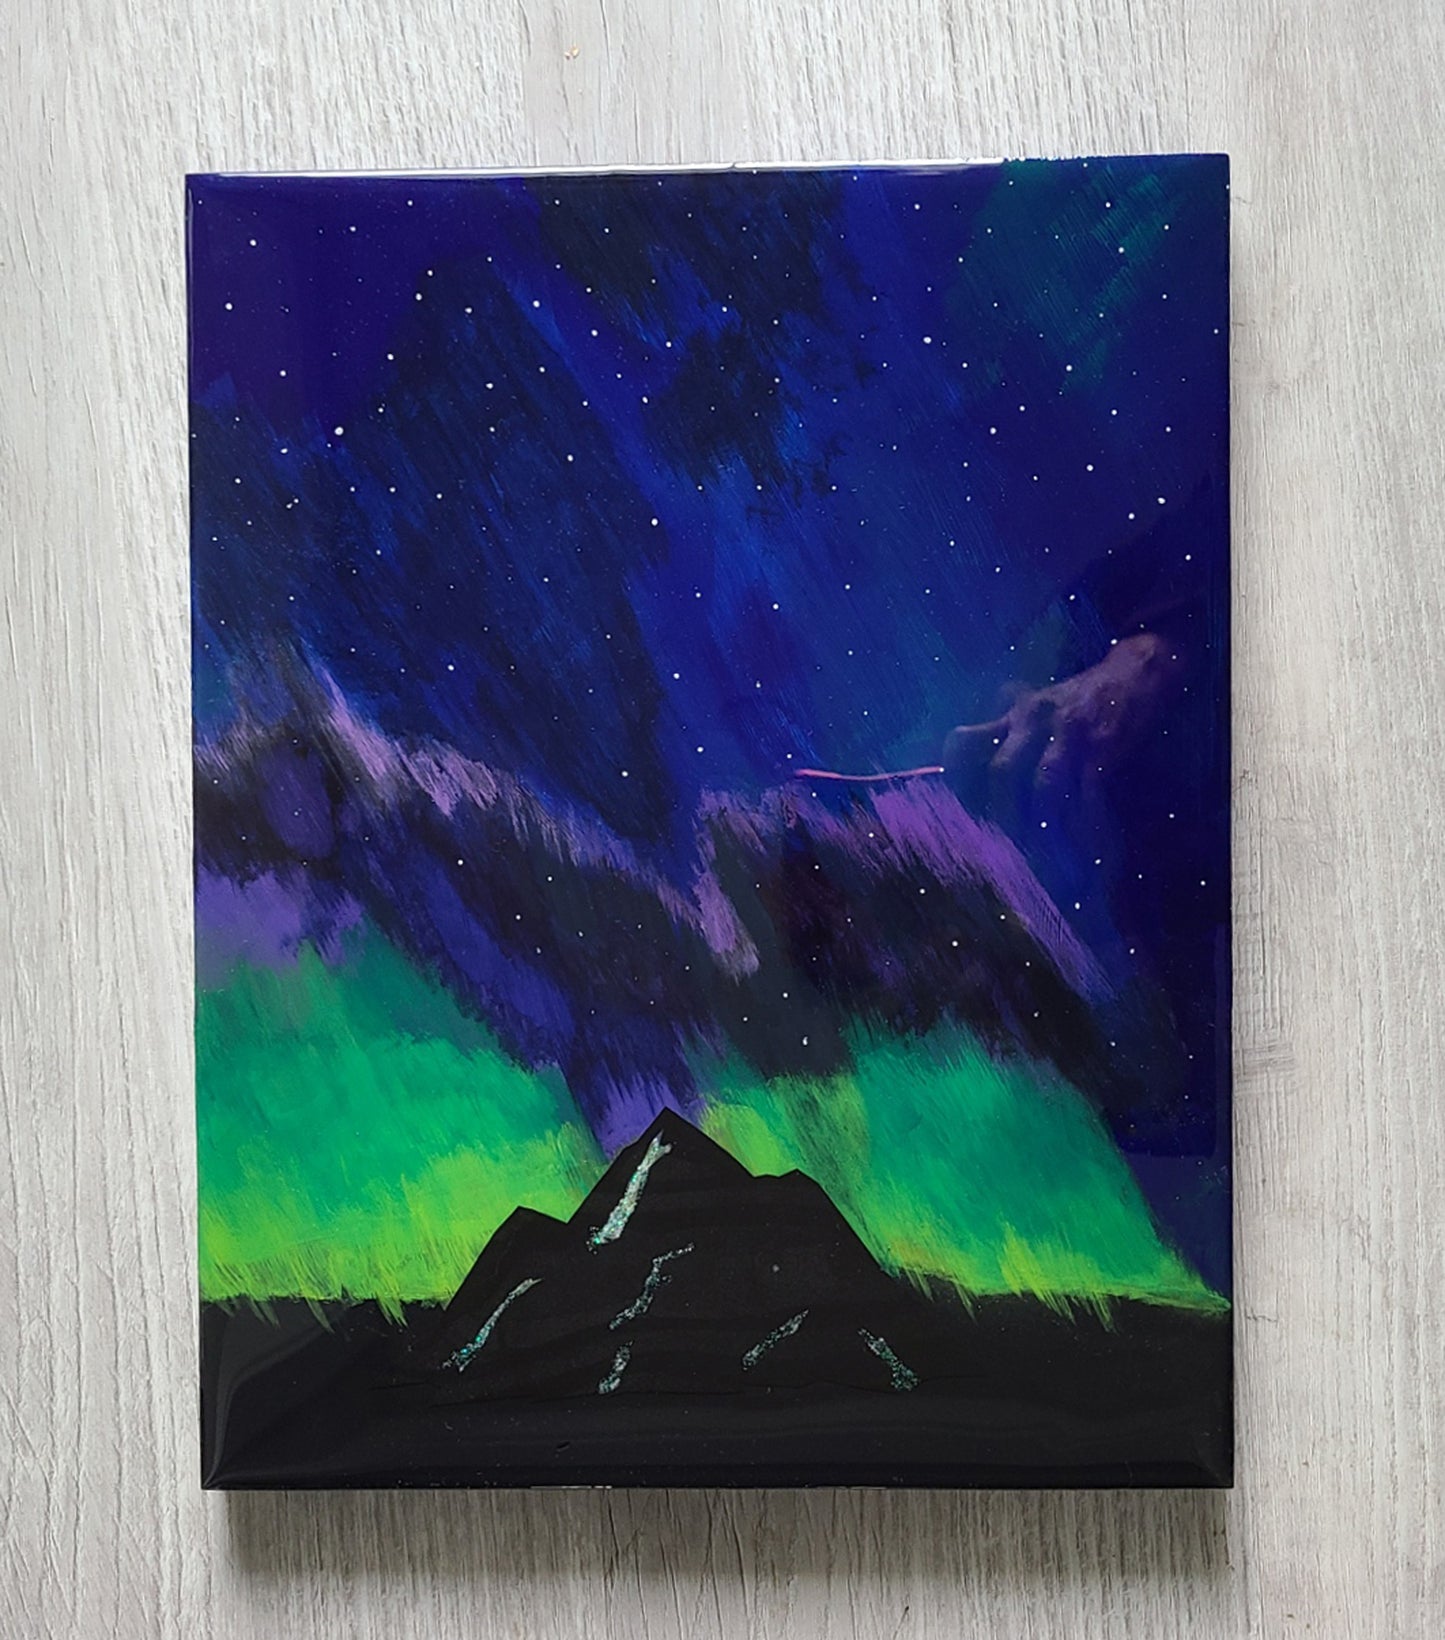 It's a bright and starry night!  The colorful Northern Lights play over the mountains in the foreground.  The mountain sparkles with snow in the crevices.  Original Artwork  Resin is UV Resistant.  Done on wood, but lightweight.  Approximate size: 11 x 14 x 1 inches  If you would like it signed on the back, leave a message with your order.